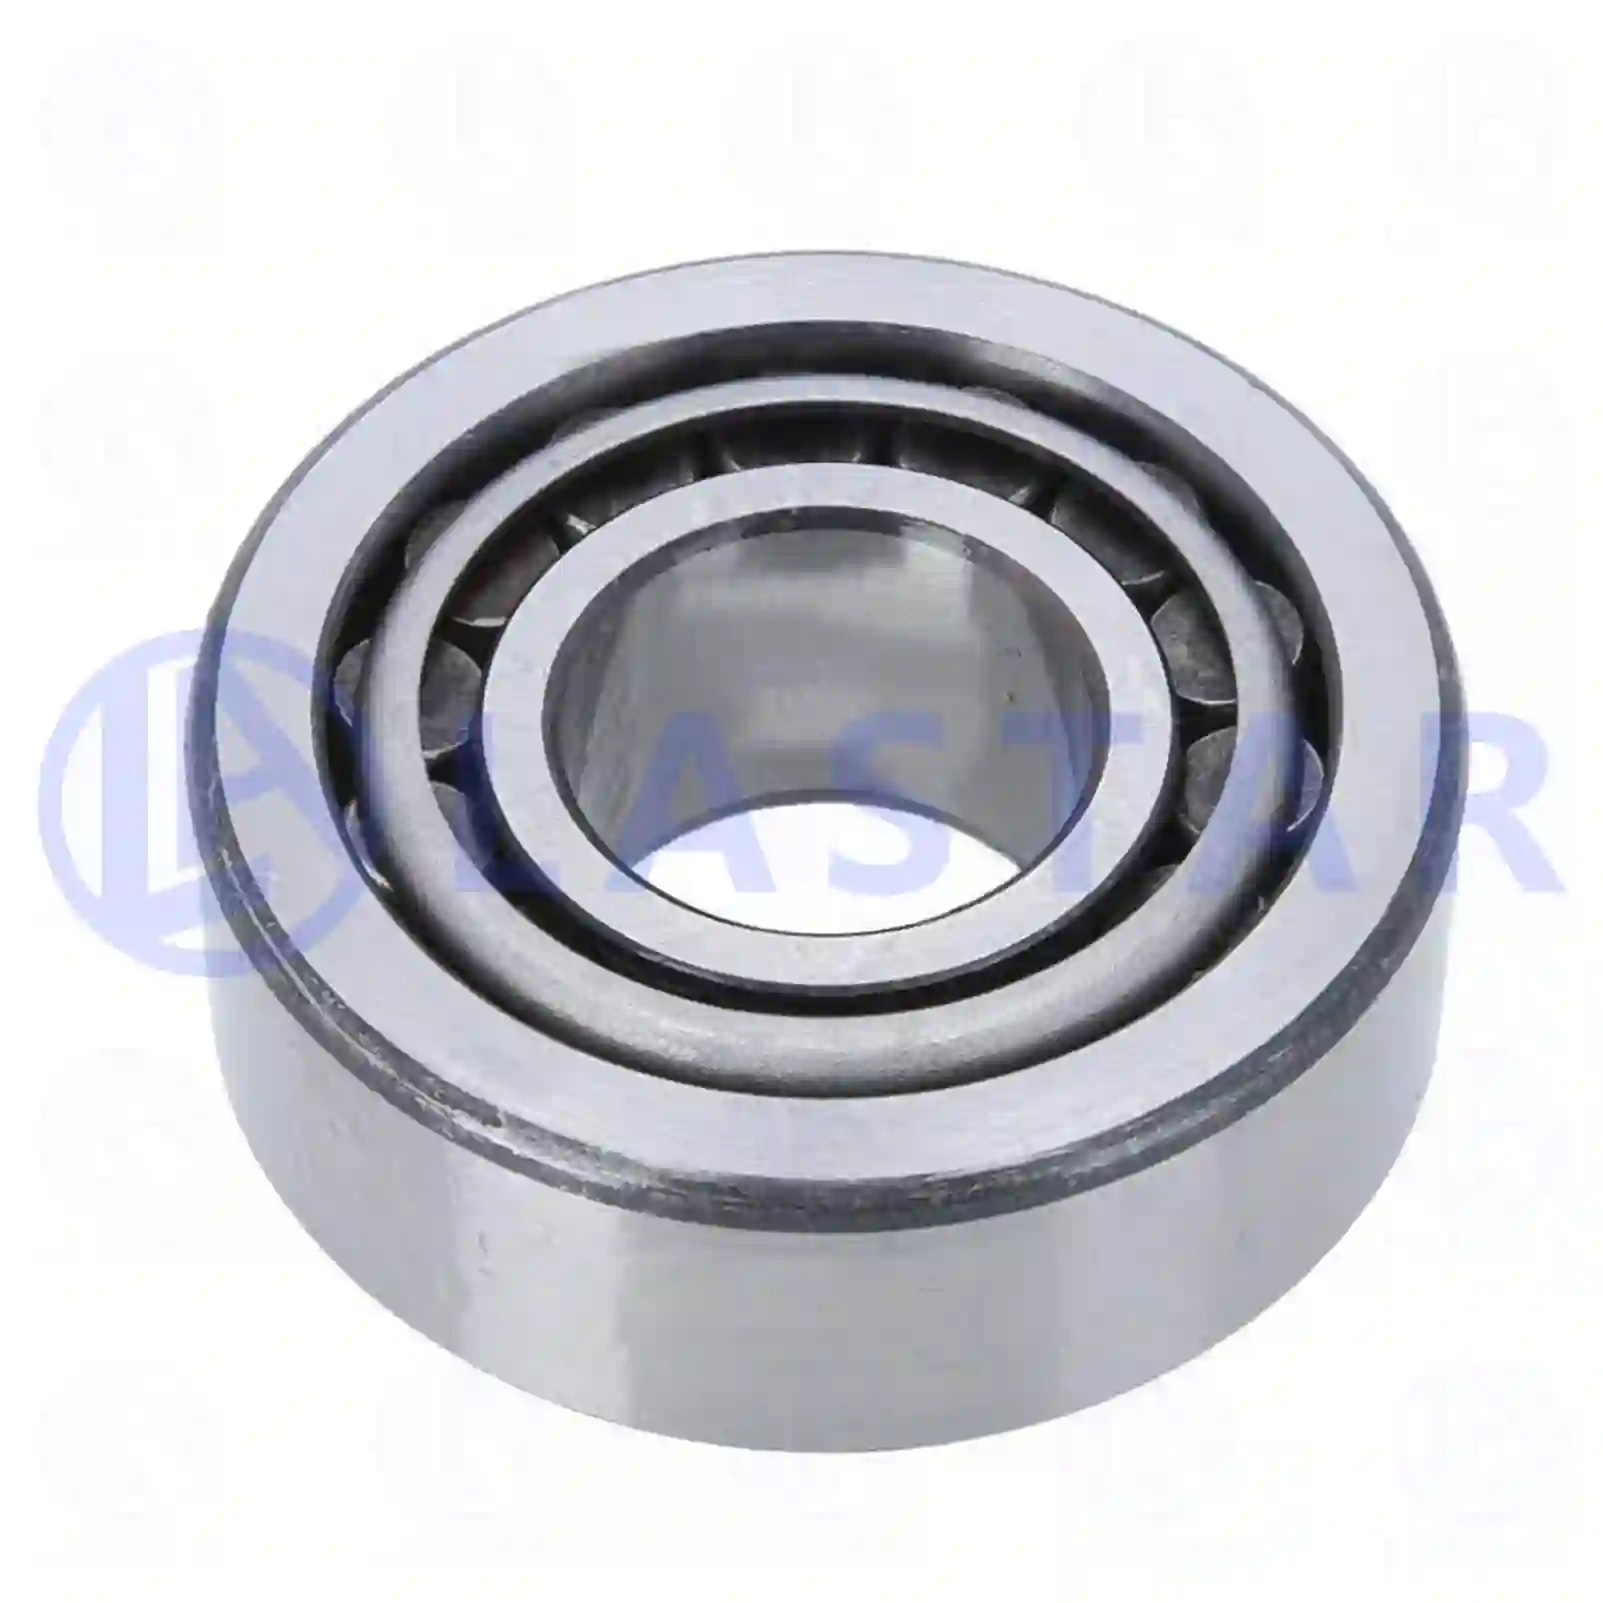 Bearings Tapered roller bearing, la no: 77725208 ,  oem no:290063314, 0264060300, 26800560, 91124-PH8-008, 06324902800, 06324990112, 34934200002, 88934206010, A0772320600, A0773230600, 0009819505, 000720032306, 0019818305, 0019818705, 0019819505, 0069815905, 3129810205, 3129810501, 09022-0015P, 38120-13200, 38120-13201, 38120-13210, 7058598, 0023432306, 0773230680, 14614, 0009815318, 806330010, 11073, 66001044, 6601044, ZG03010-0008 Lastar Spare Part | Truck Spare Parts, Auotomotive Spare Parts